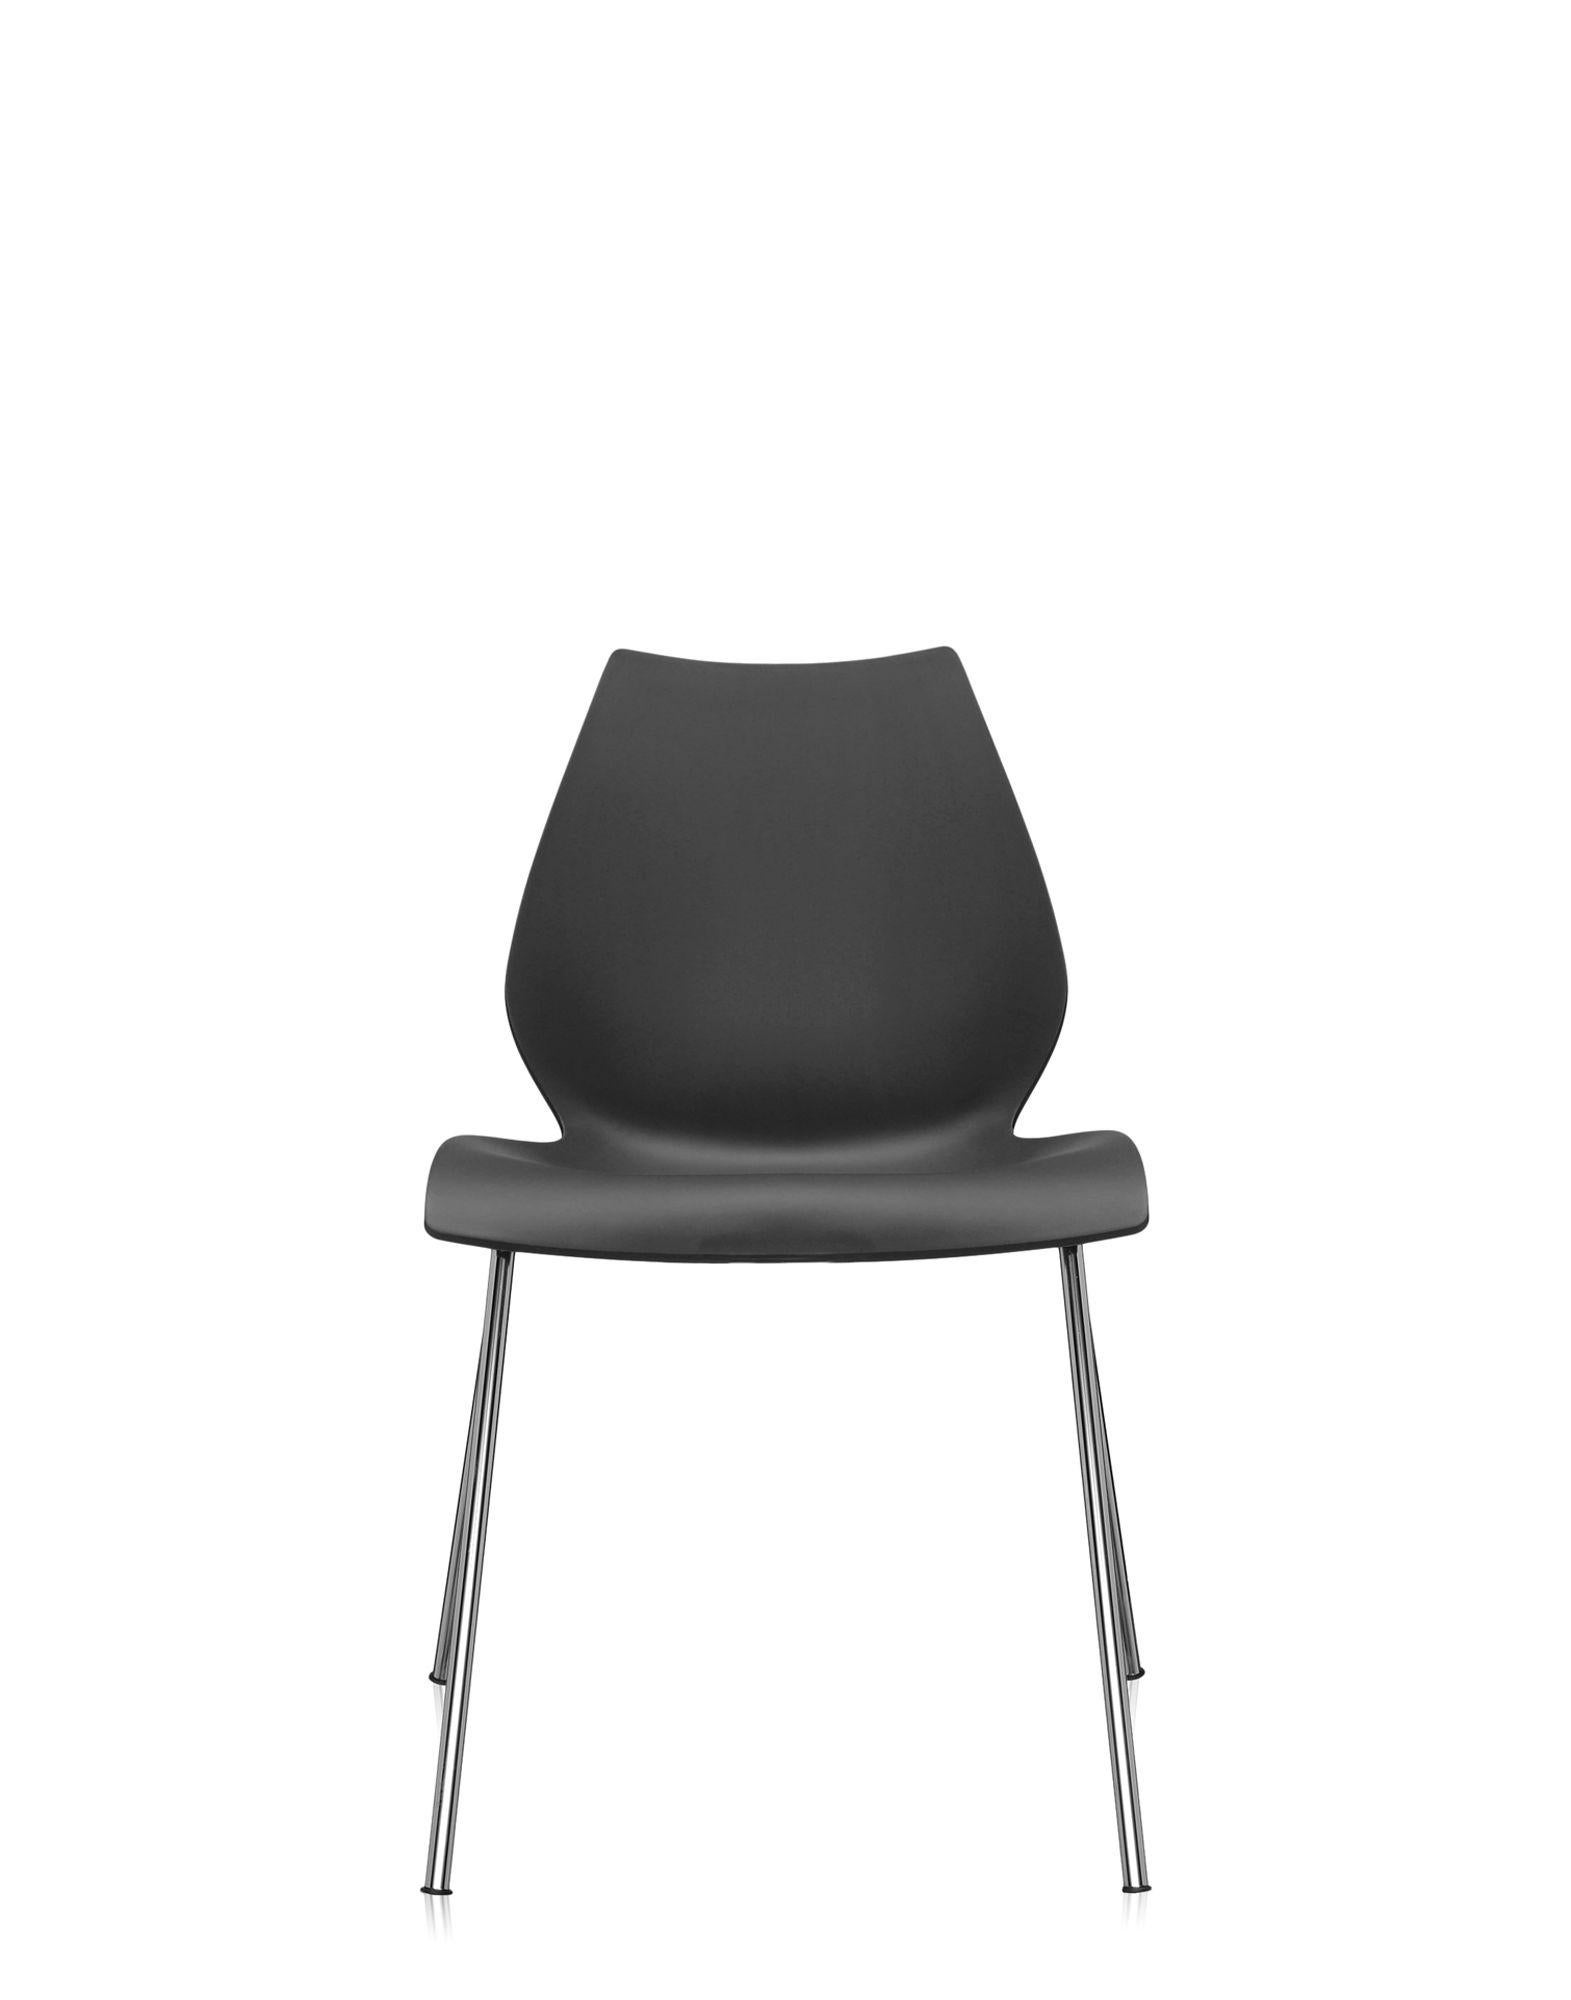 Modern Set of 2 Kartell Maui Armchair in Black by Vico Magistretti